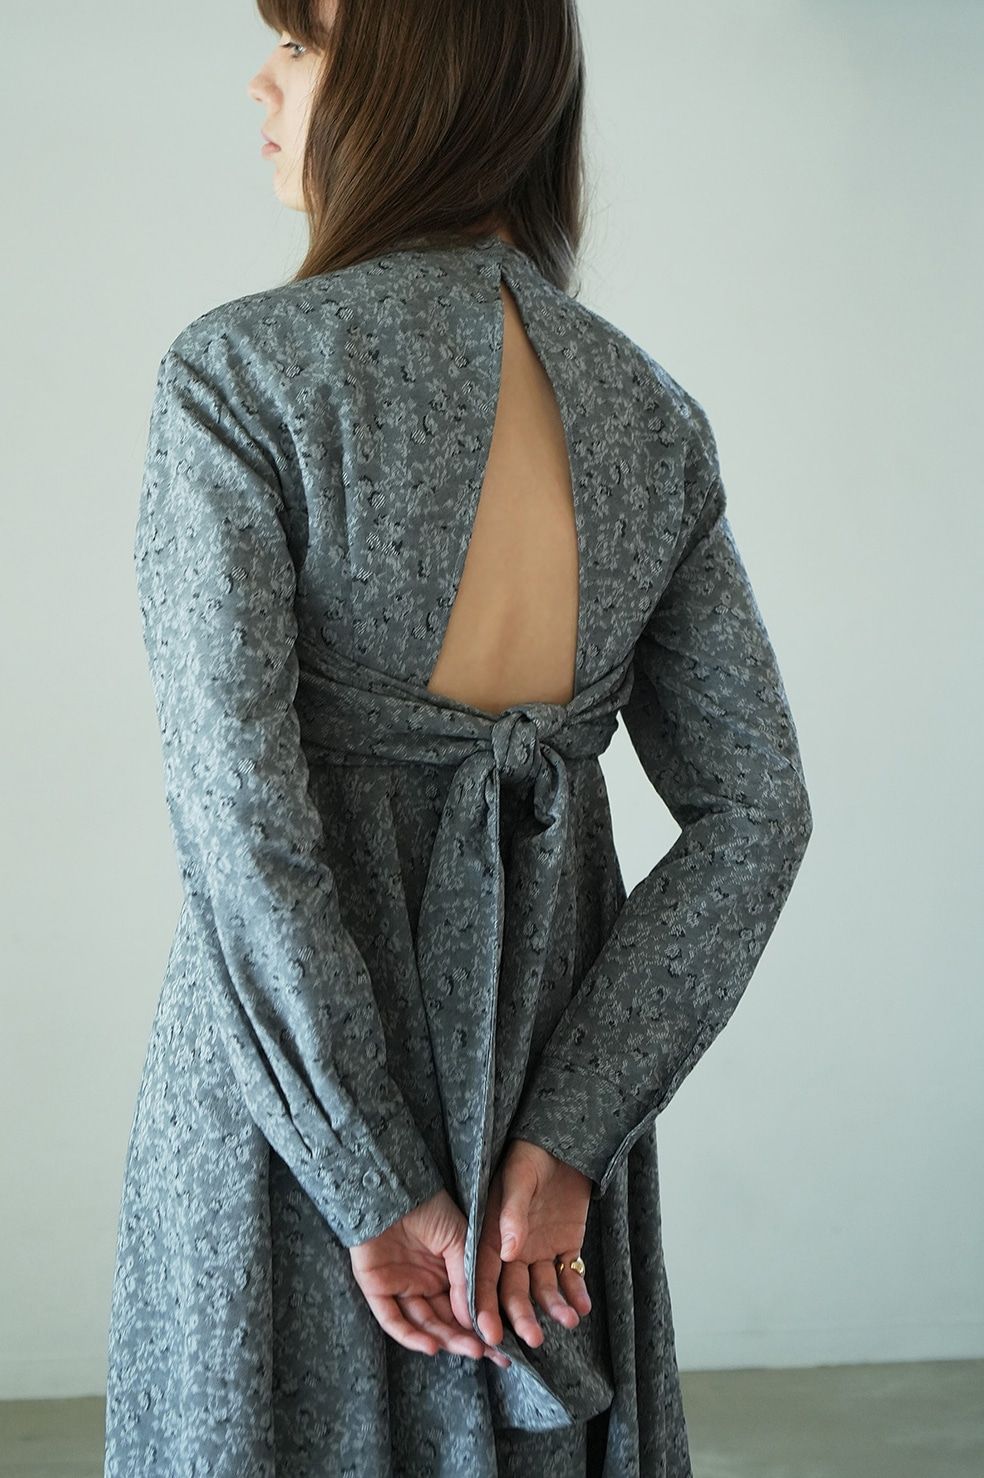 CLANE - ジャガードワンピース - 2WAY JAQUARD ONEPIECE - GREY 